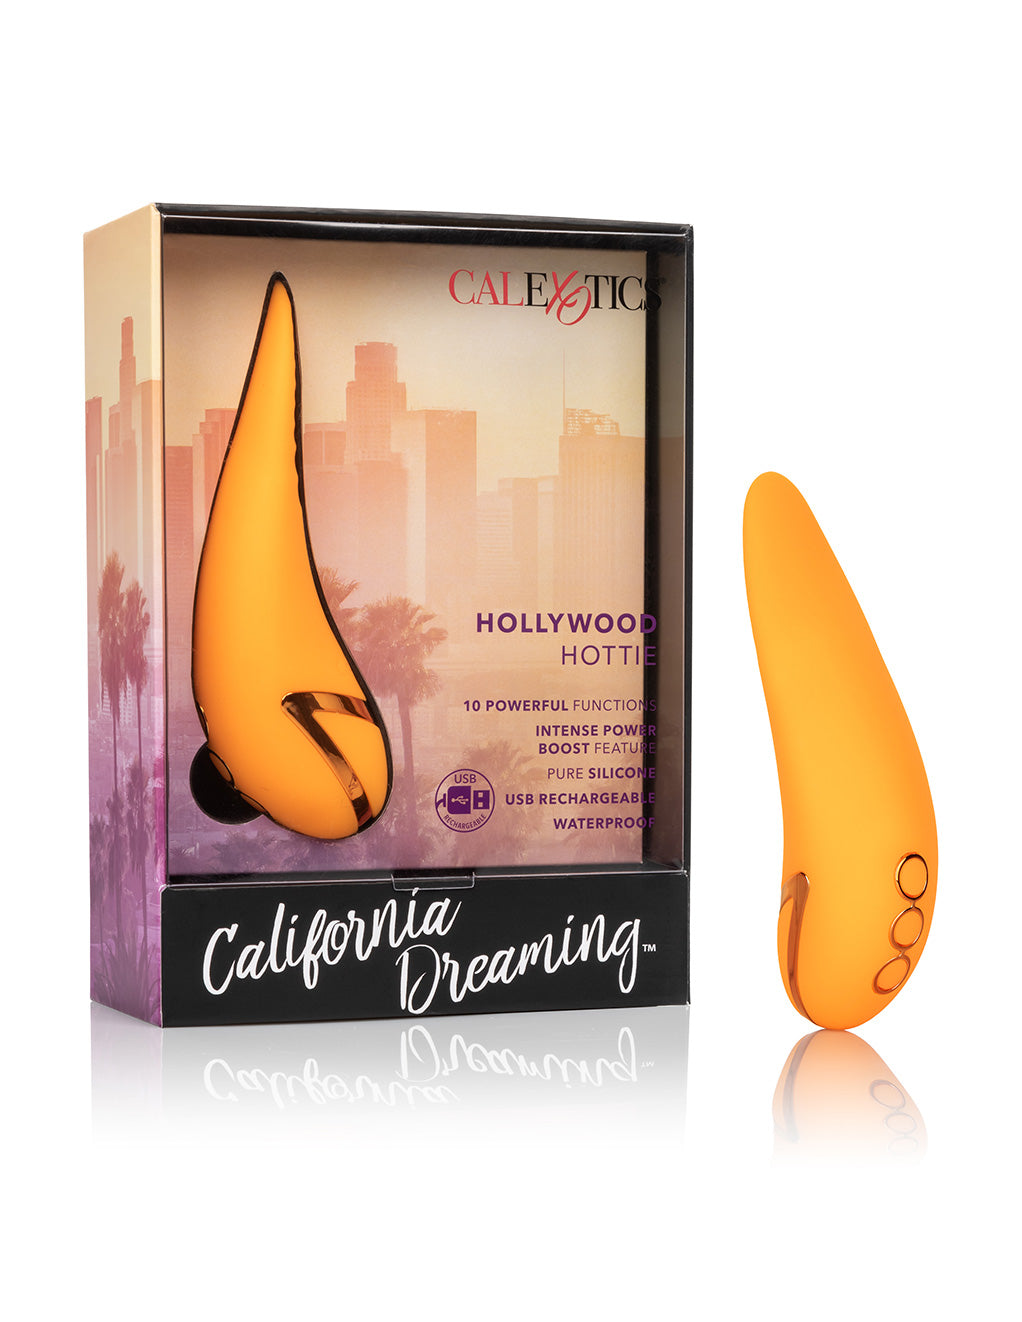 Cal Dreaming Hollywood Hottie By California Exotics Box With Product